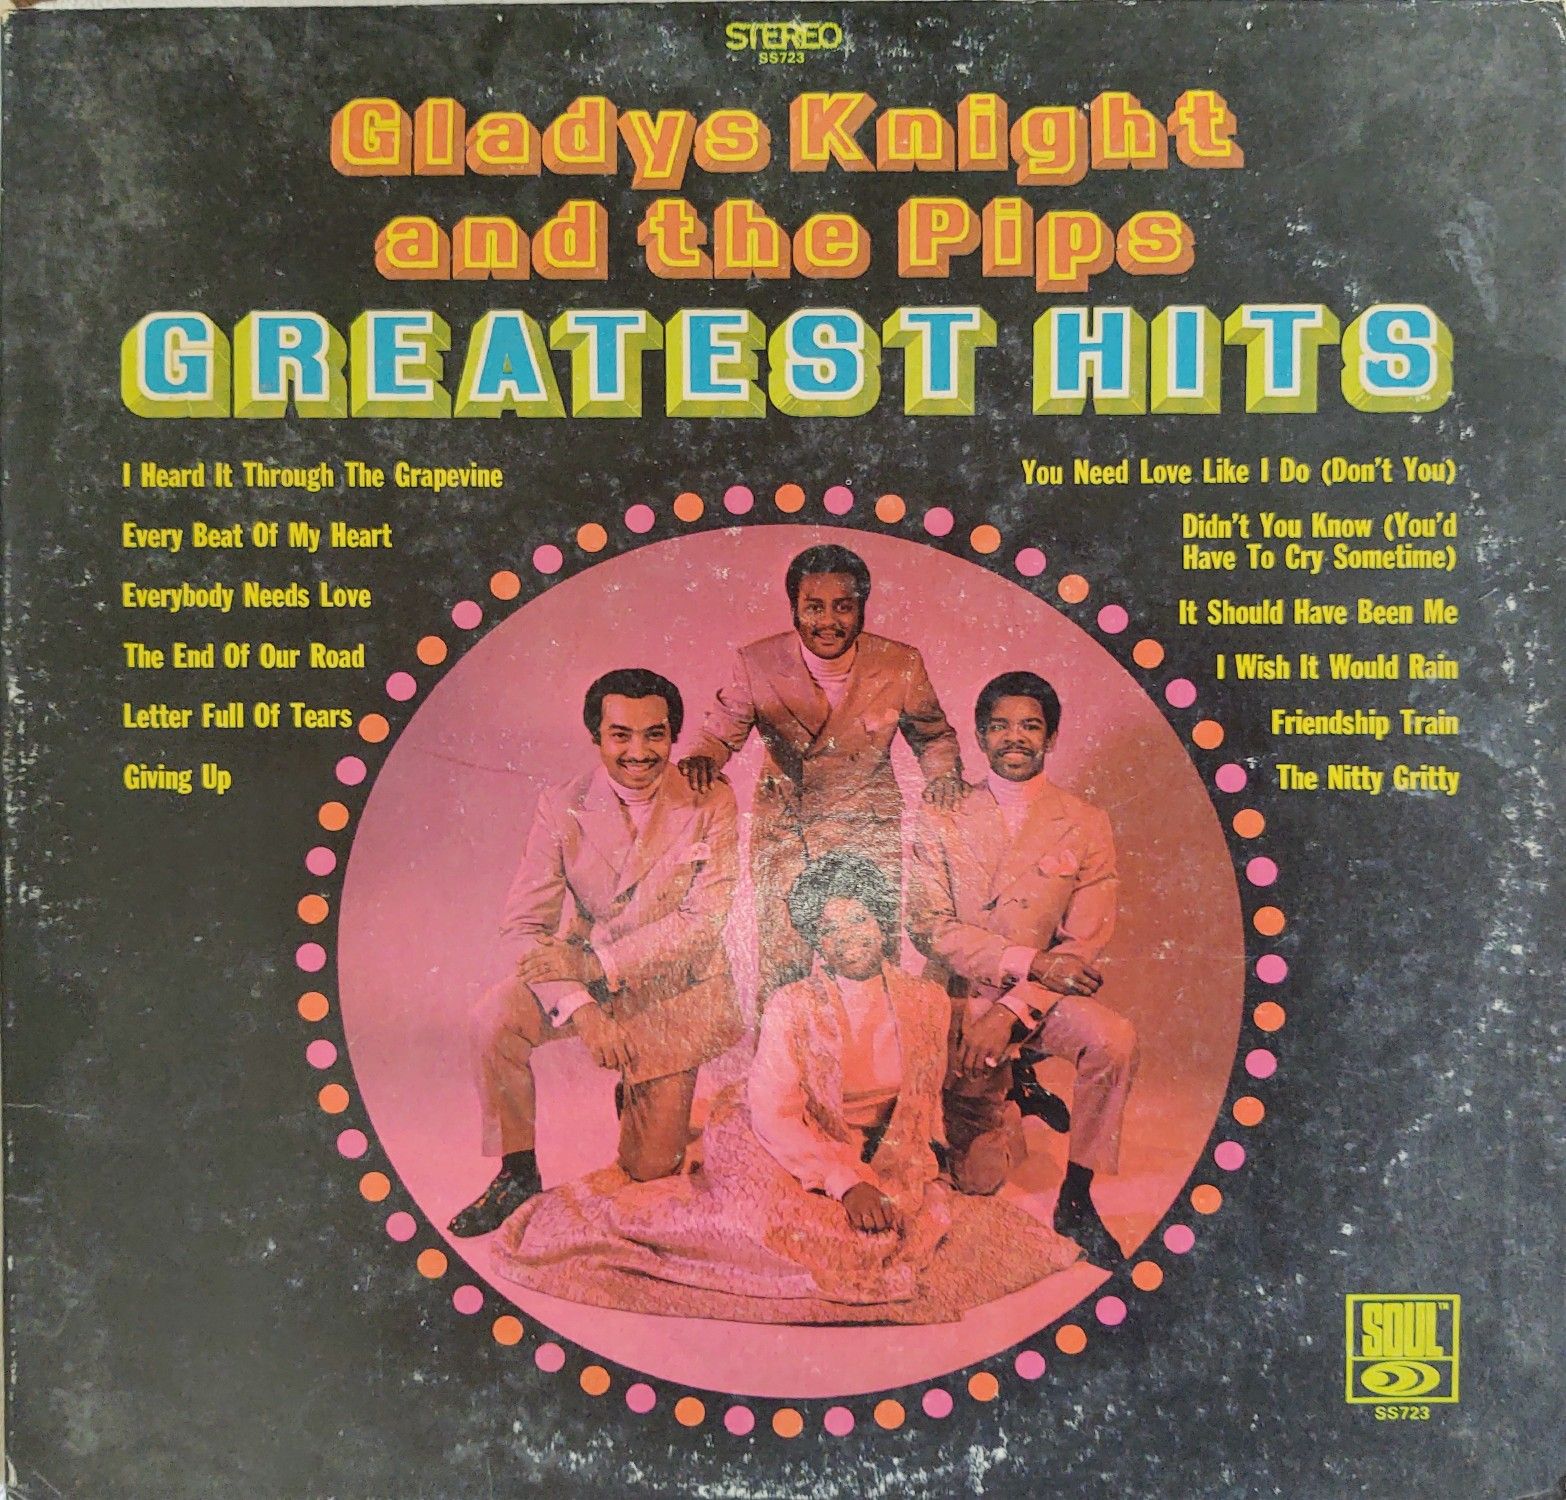 Gladys Knight and the Pip's-Greatest Hits